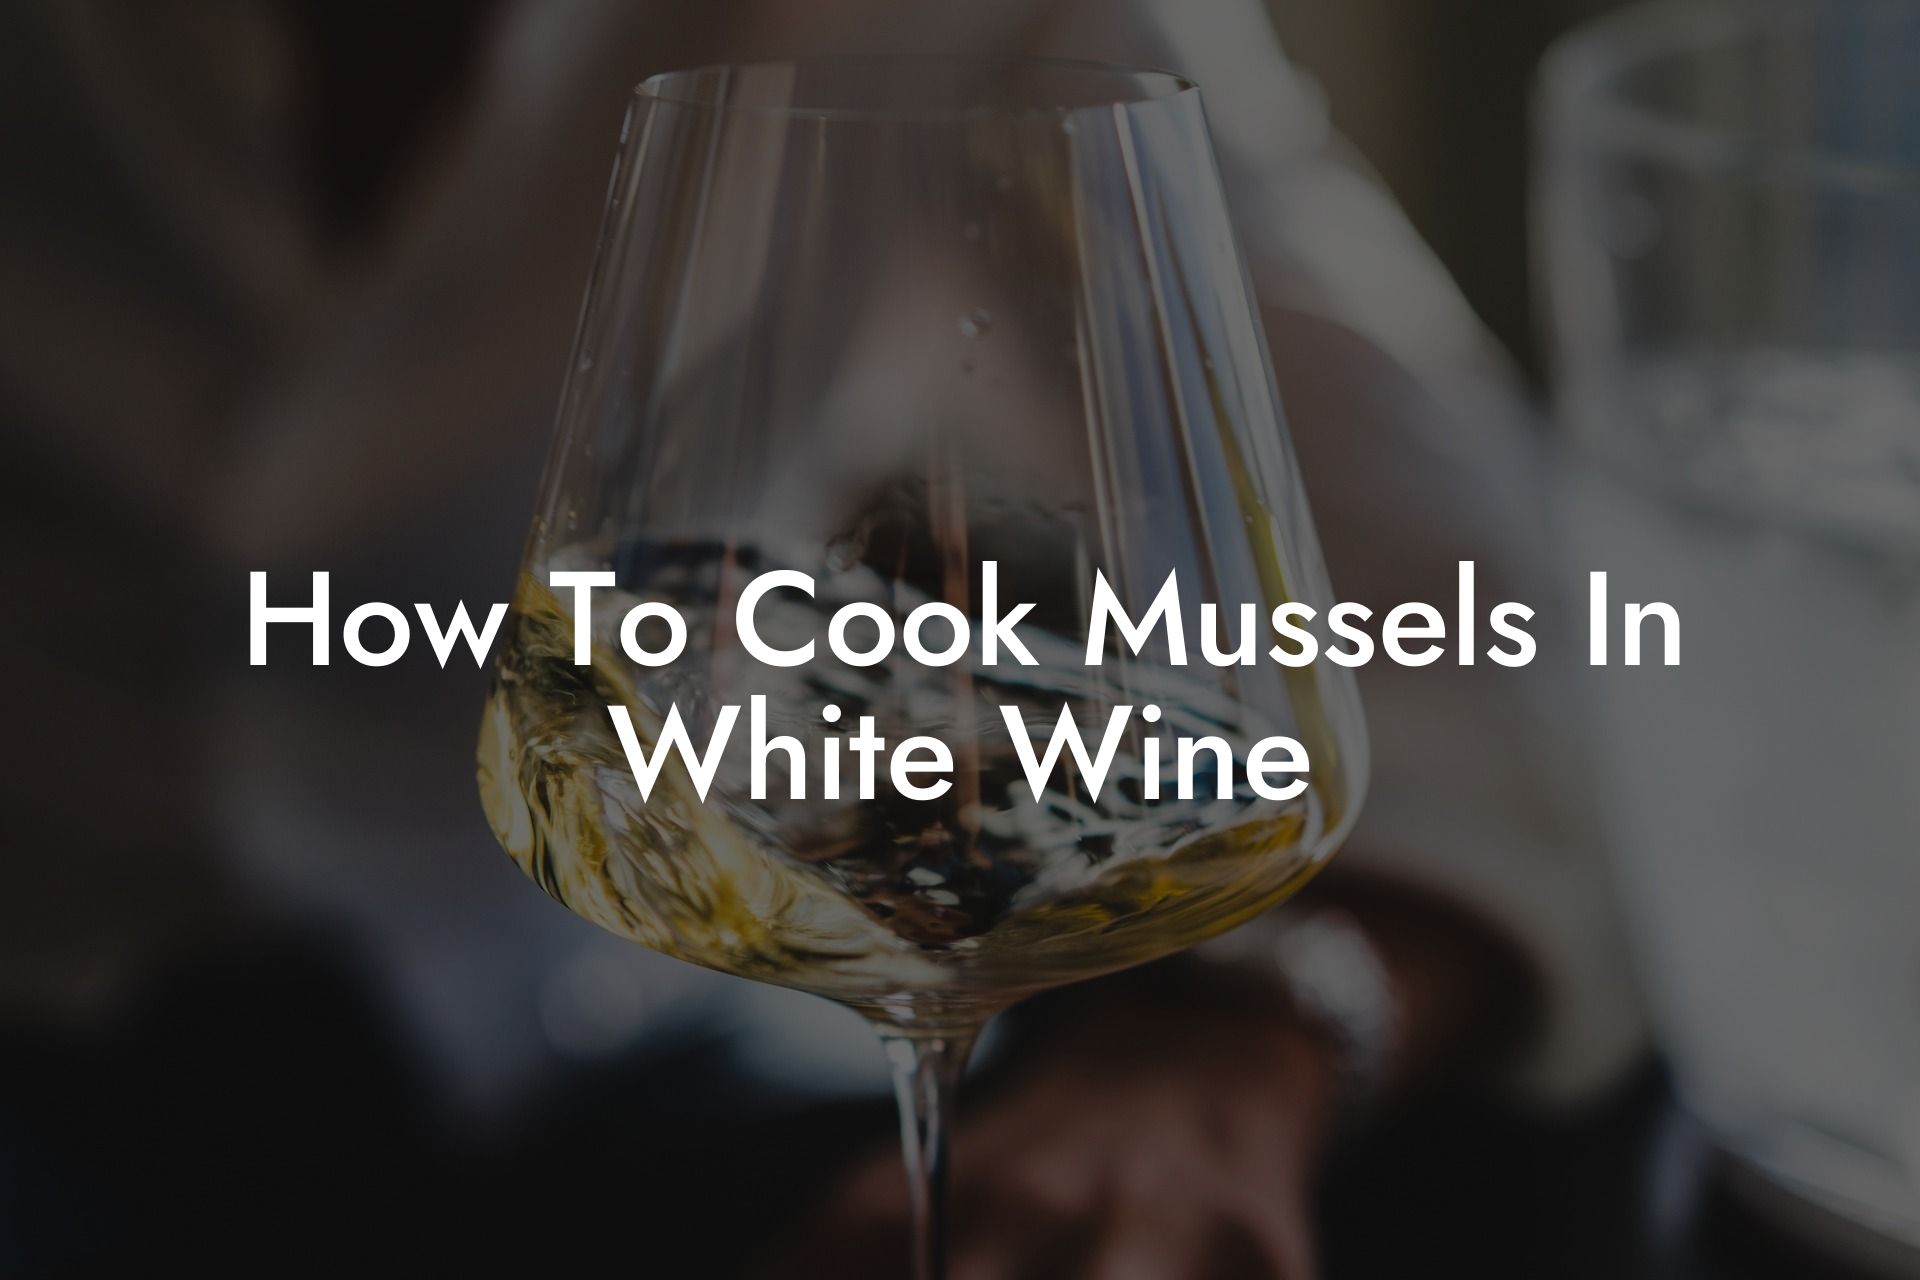 How To Cook Mussels In White Wine